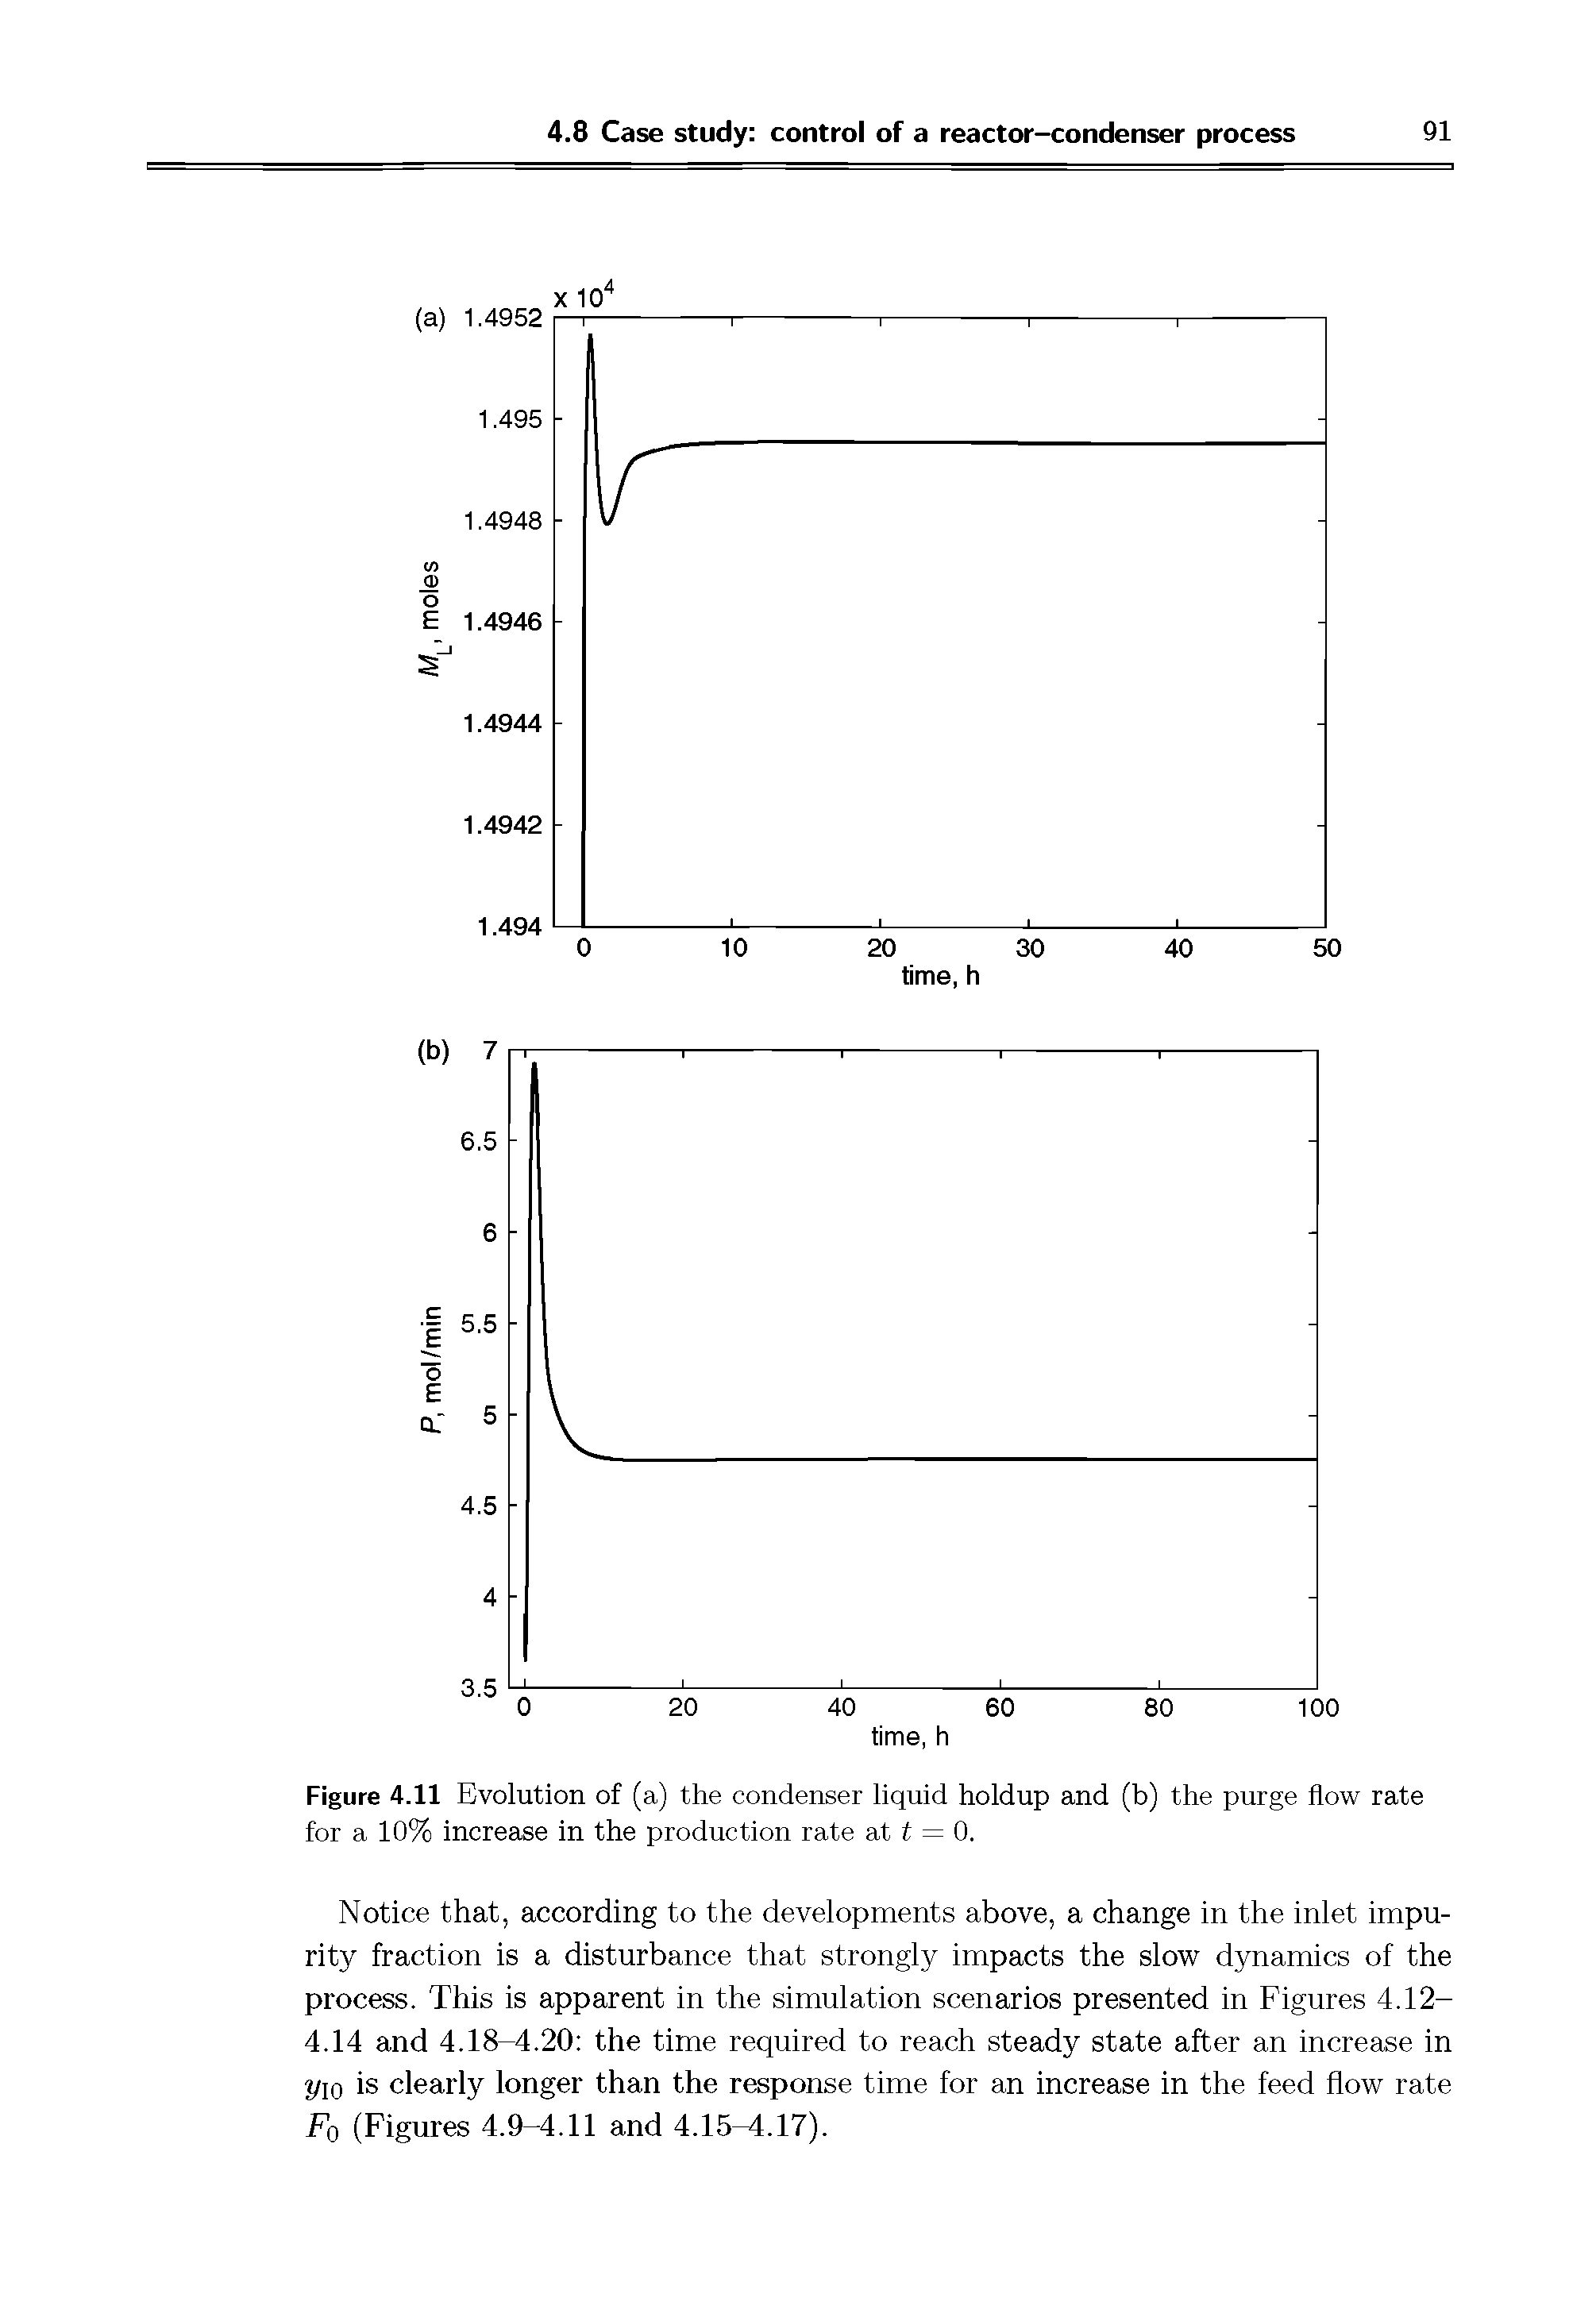 Figure 4.11 Evolution of (a) the condenser liquid holdup and (b) the purge flow rate for a 10% increase in the production rate at t = 0.